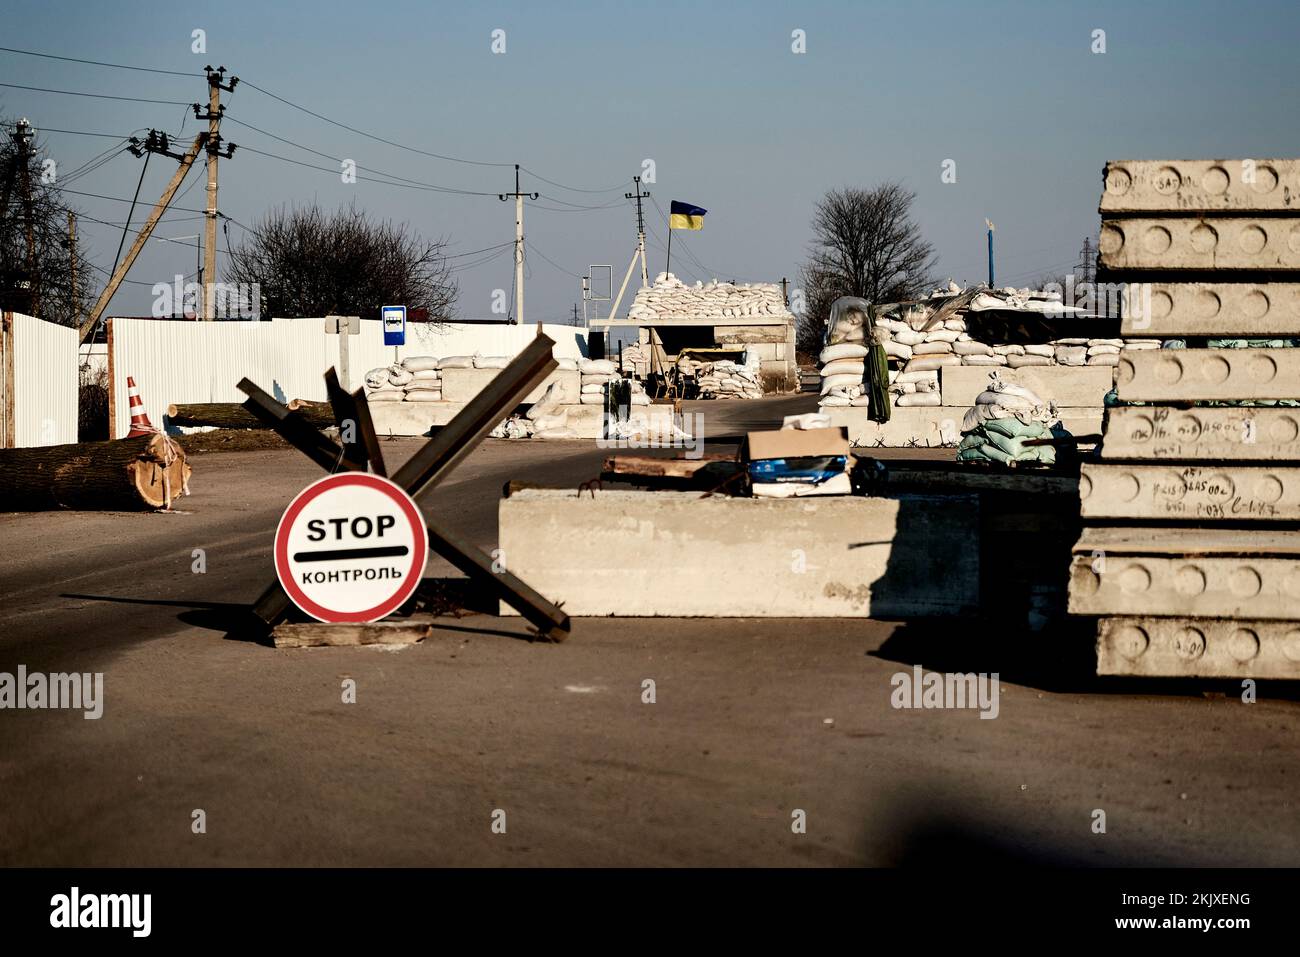 Antonin Burat / Le Pictorium -  War in Ukraine: David stands up to Goliath -  20/3/2022  -  Ukraine / OBLAST OF KYIV  -  A checkpoint at the entrance Stock Photo